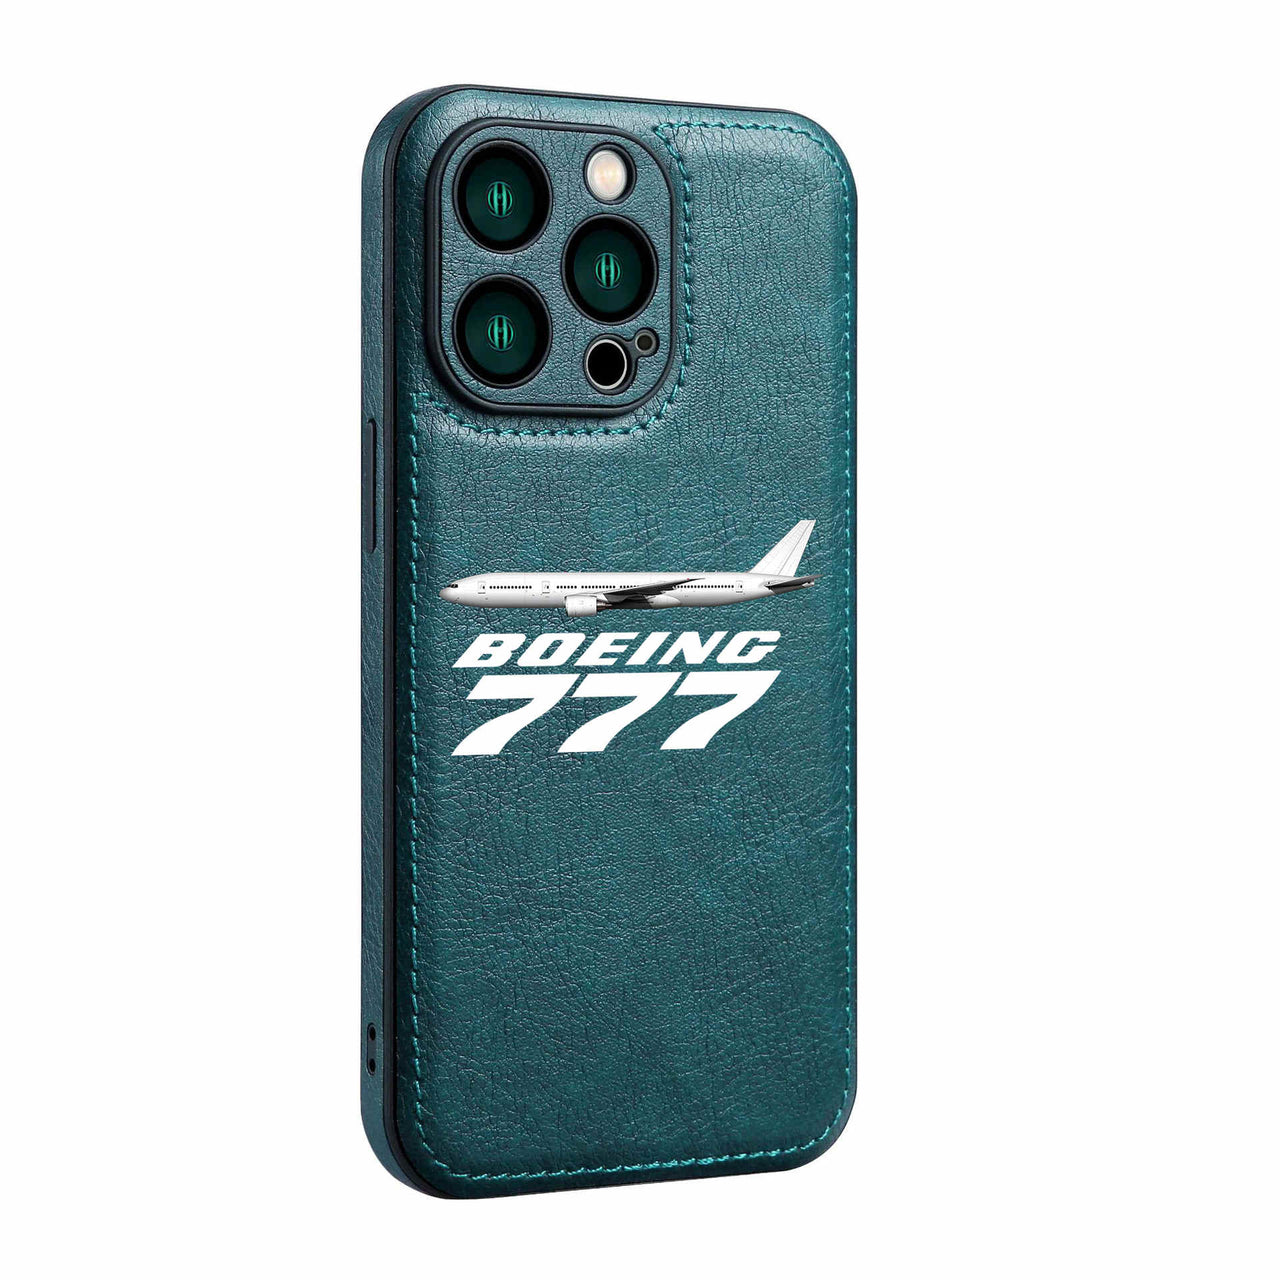 The Boeing 777 Designed Leather iPhone Cases